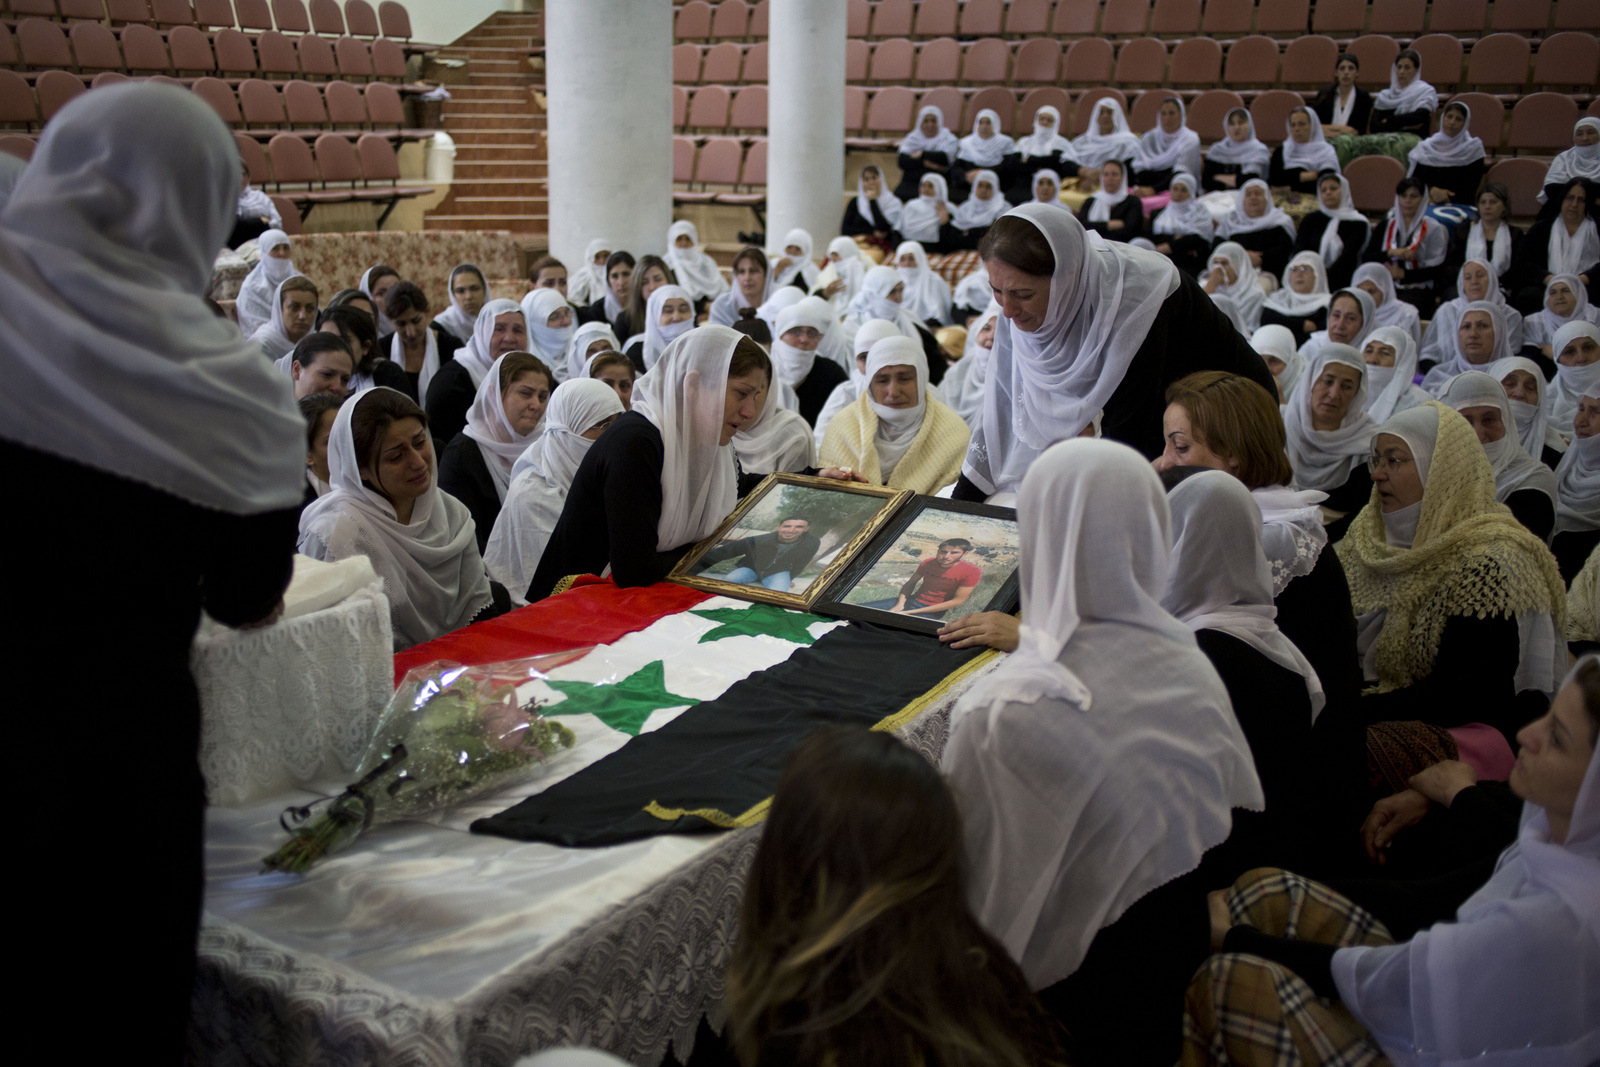 Druze women mourn the death of relatives, Thaer Mahmoud and Nazeah Mahmoud, two brothers who were killed in an Israeli airstrike after the Israeli military claim they were seen carrying a bomb near the border, in the Druze village of Majdal Shams, near the border with Syria, Israeli-controlled Golan Heights, April 27, 2015. (AP/Ariel Schalit)